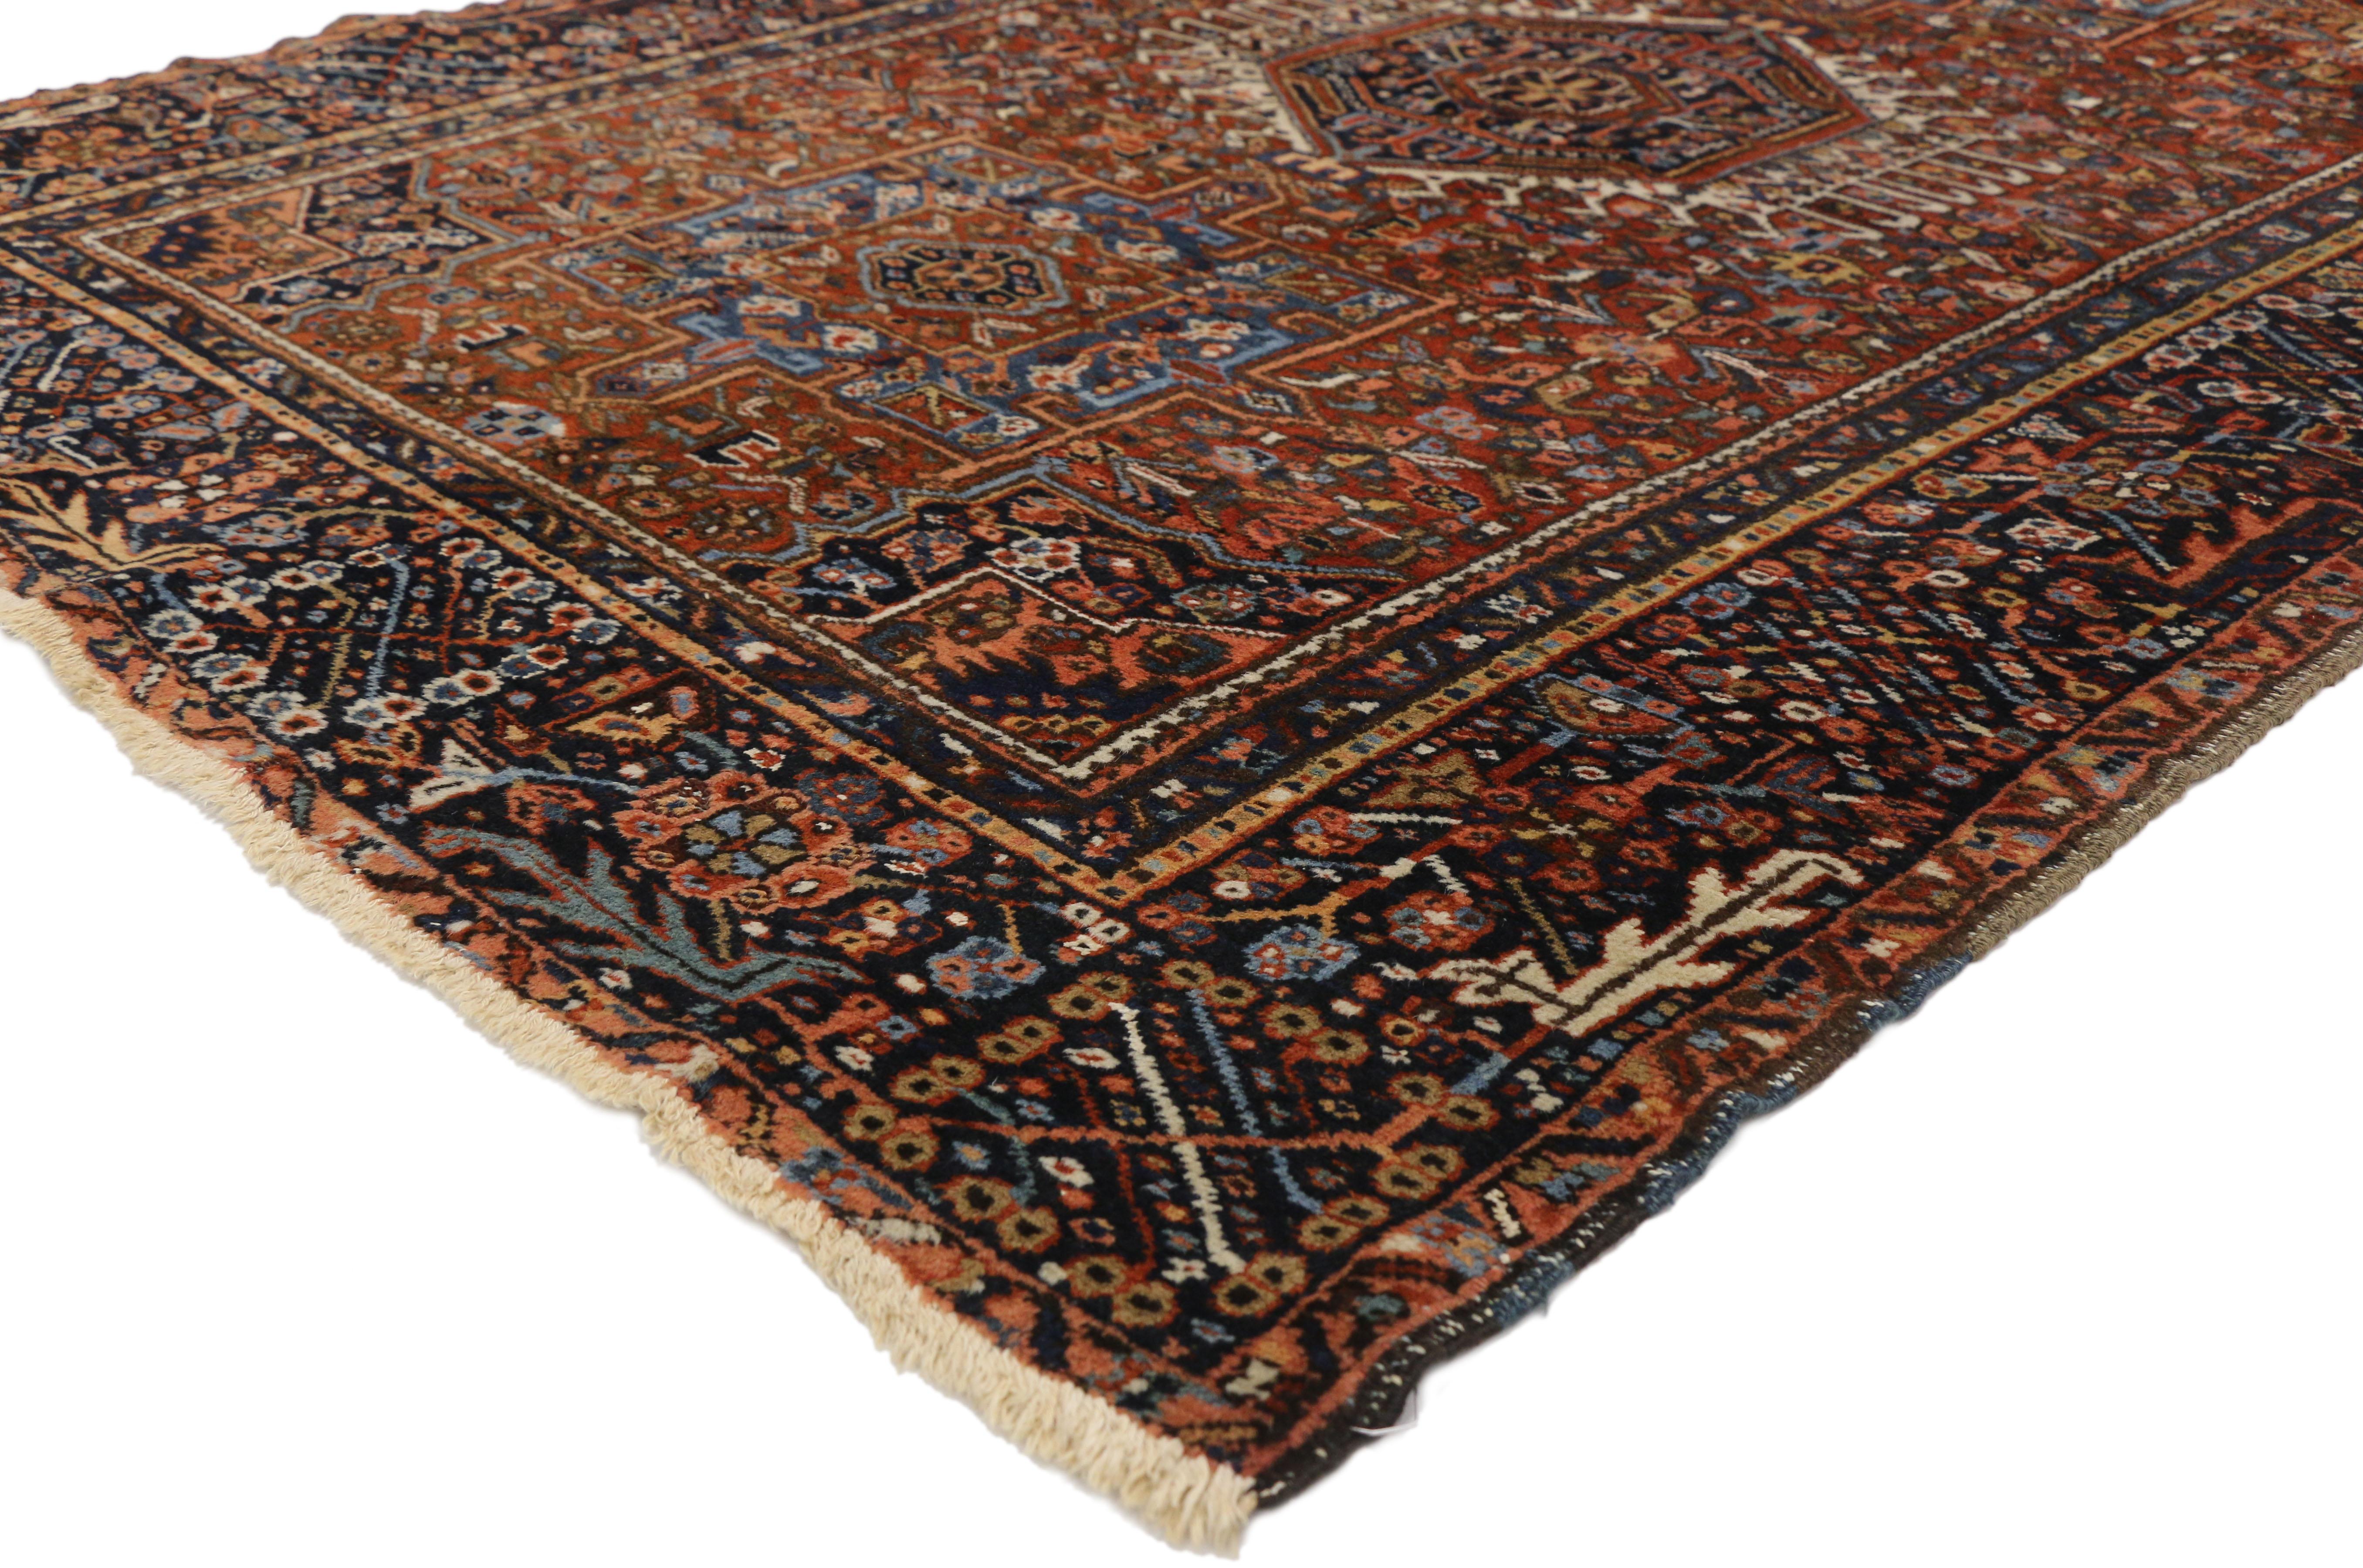 77064 Antique Persian Heriz Rug with Tribal Style, Study or Home Office Rug 04'07 x 06'06. This hand-knotted wool antique Persian Heriz rug features three medallions with cruciform motifs. The central medallion outlined in a geometric stark ivory